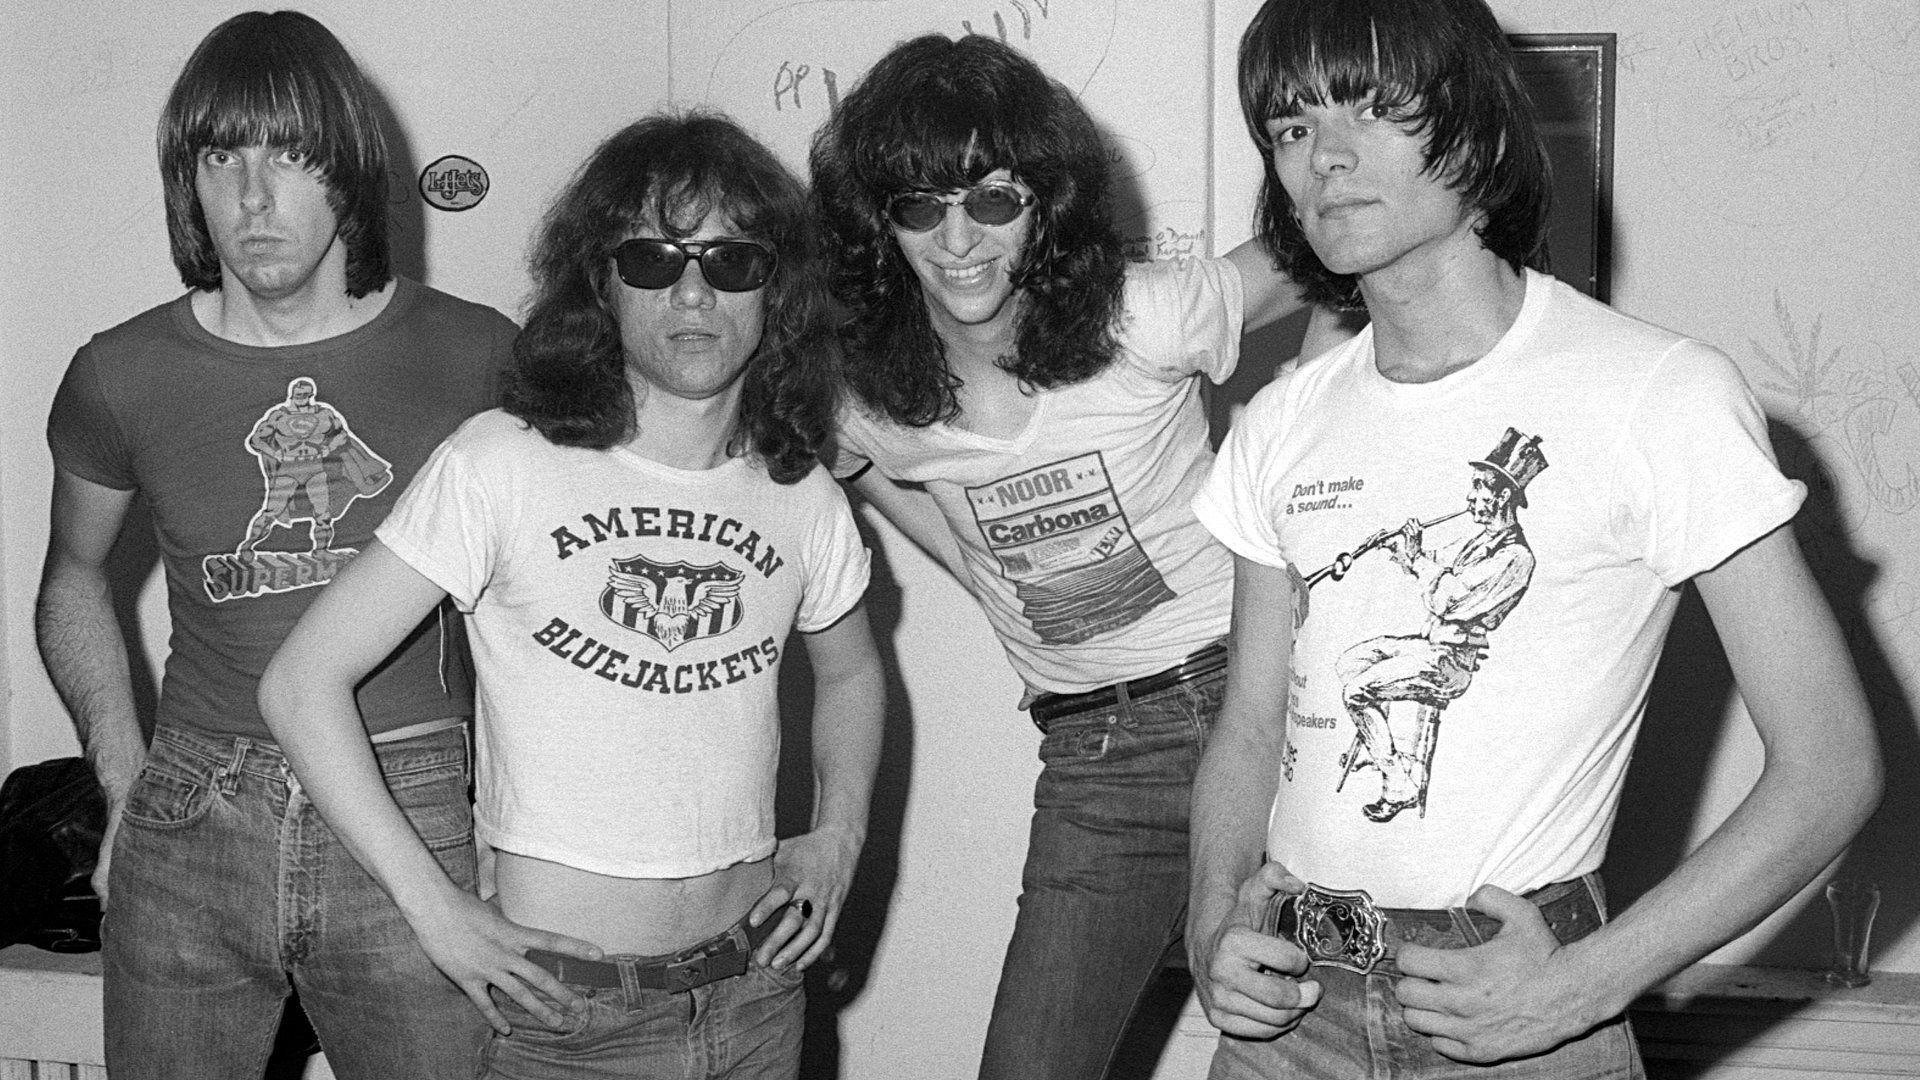 WHERE WERE YOU WHEN YOU FIRST HEARD THE RAMONES?